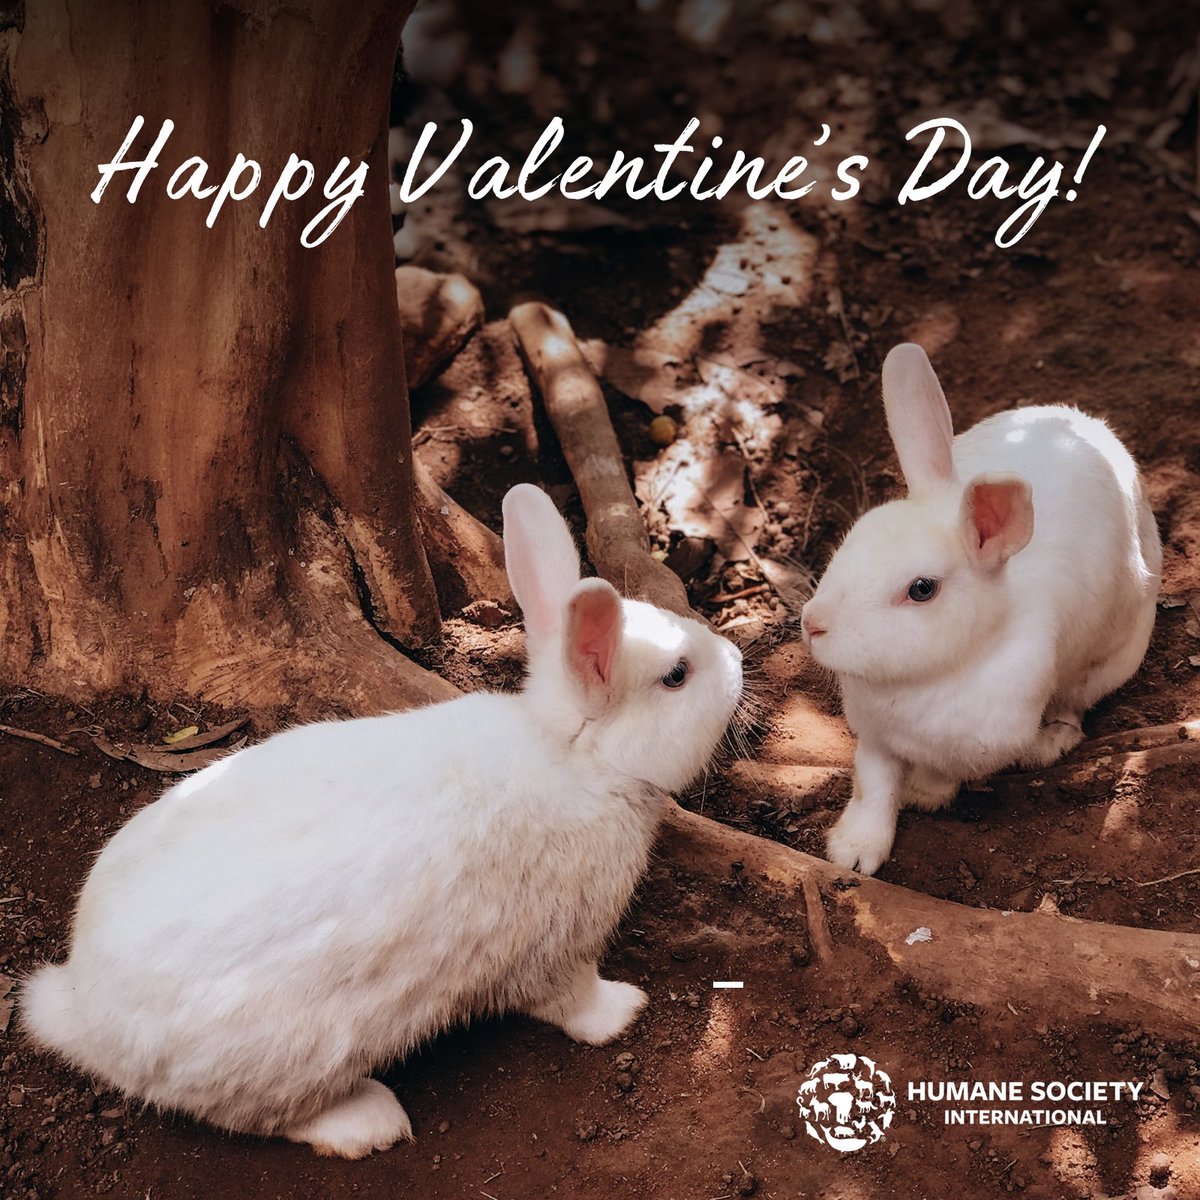 Happy Valentines Day! ❤️🐰 Share far and wide to show your love for animals today, and every day!

#SomeBunnyLovesYou #BeCrueltyFree